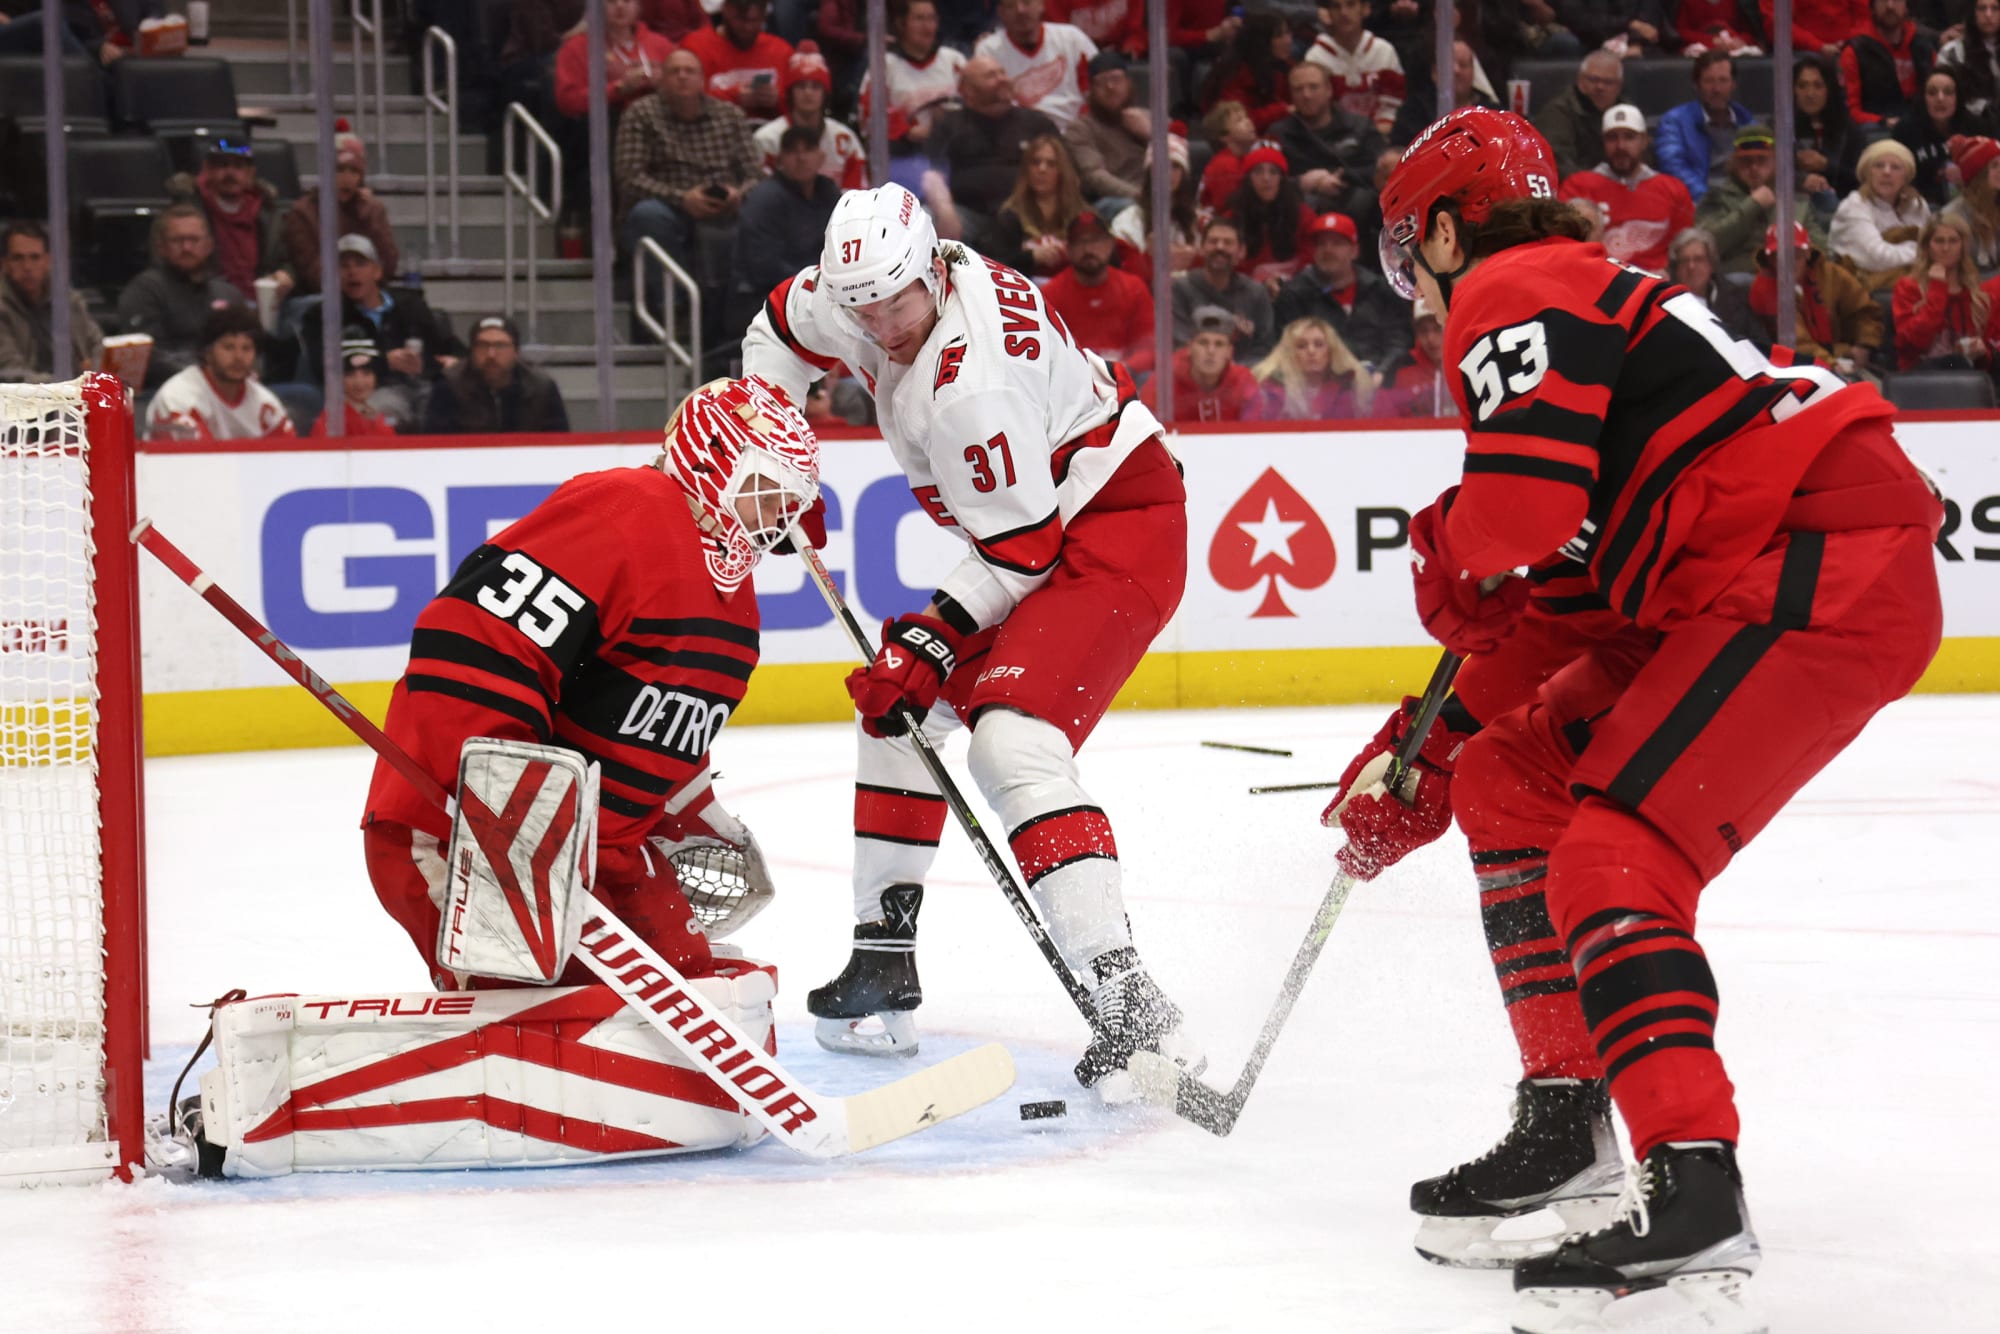 The Carolina Hurricanes stifled the Detroit Red Wings Tuesday night